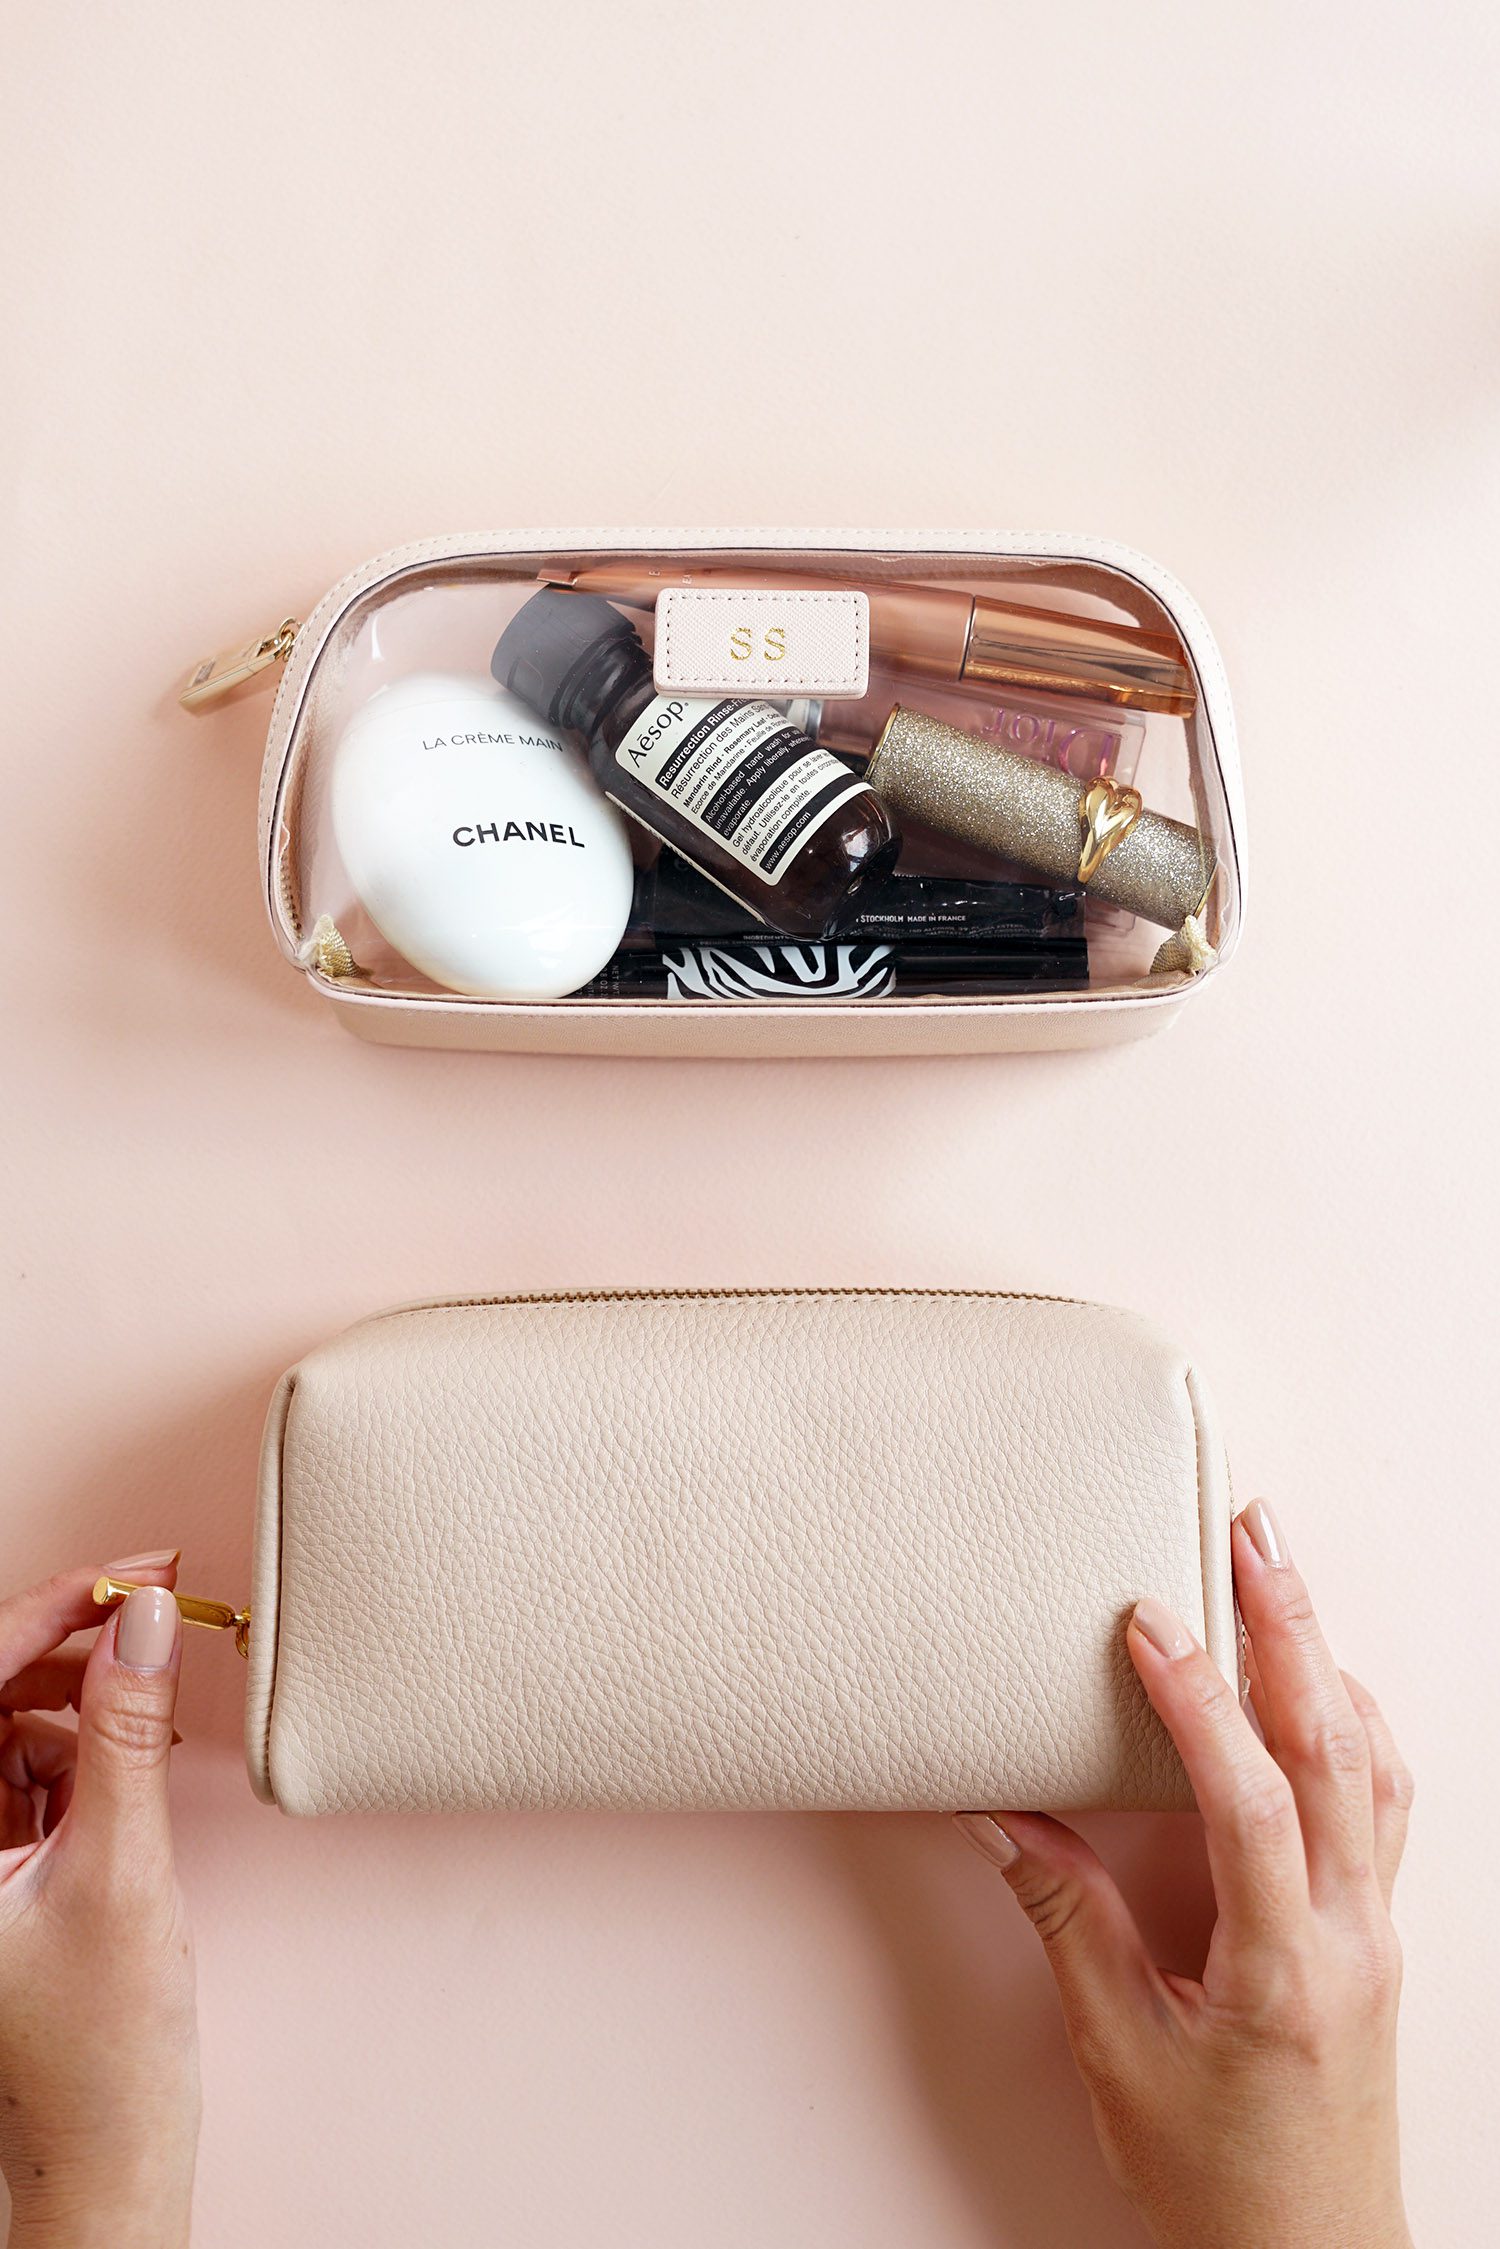 Coquette: Chanel Essential Makeup Case and a Note to Clean Your